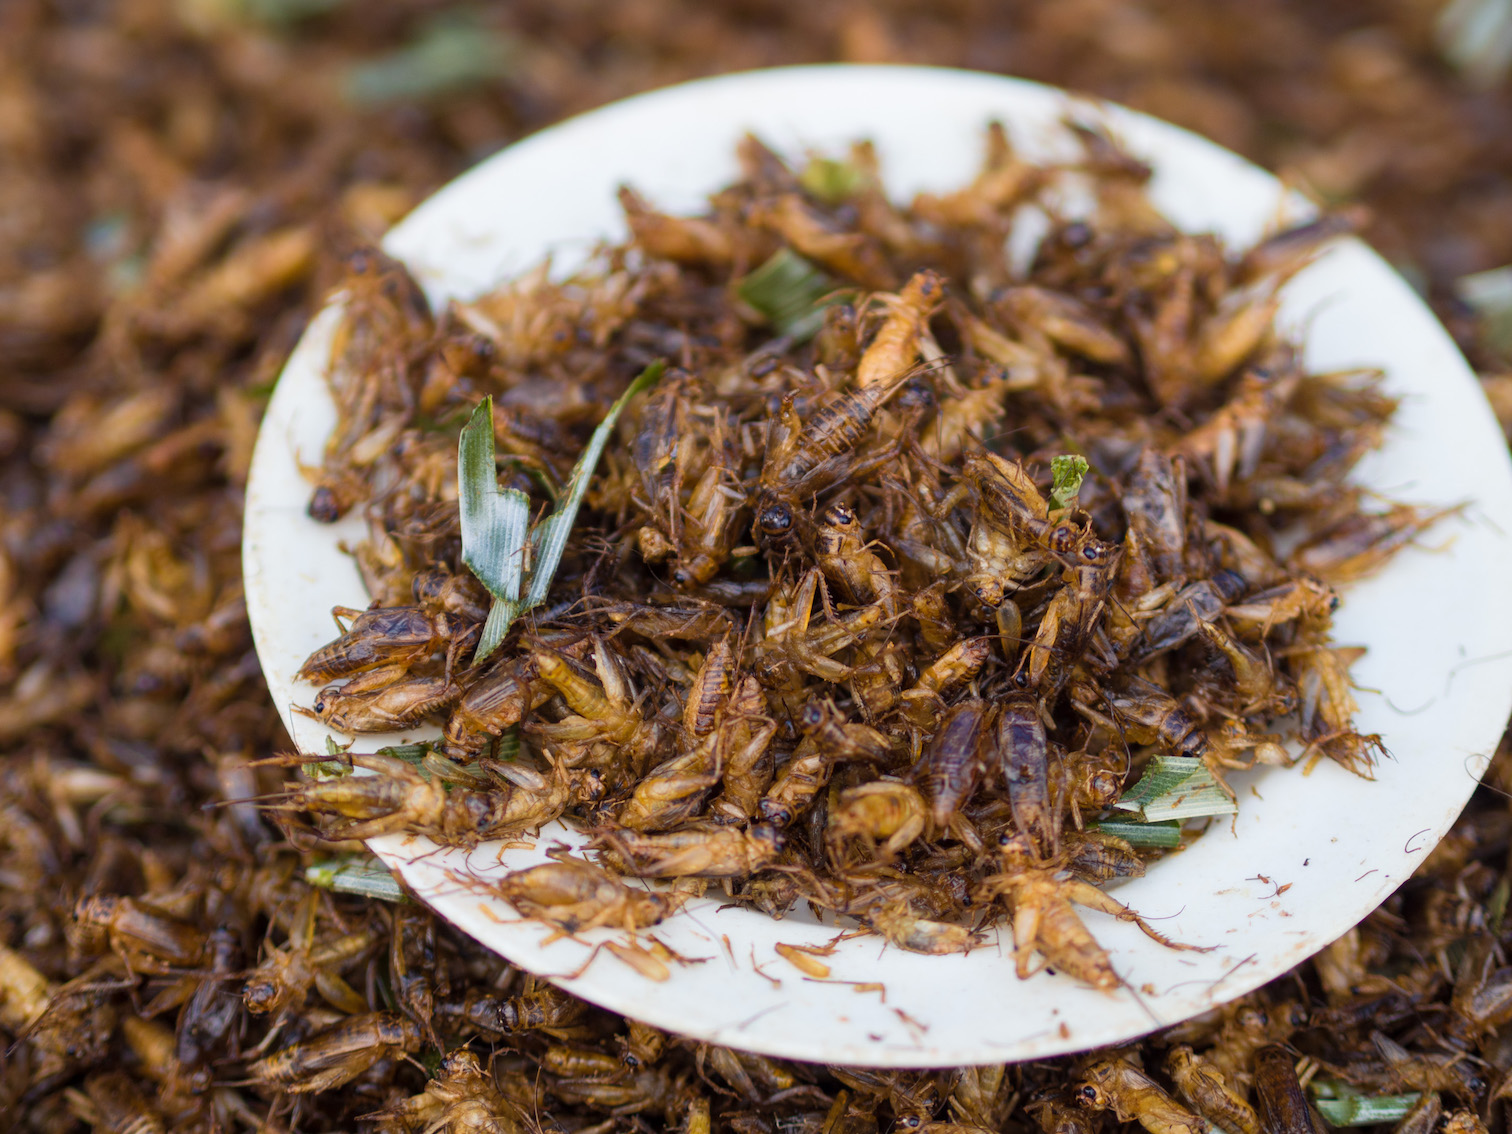 What’s that smell? Big Food corporations are quietly adding crickets and other insects into meal bars, cookies and snacks